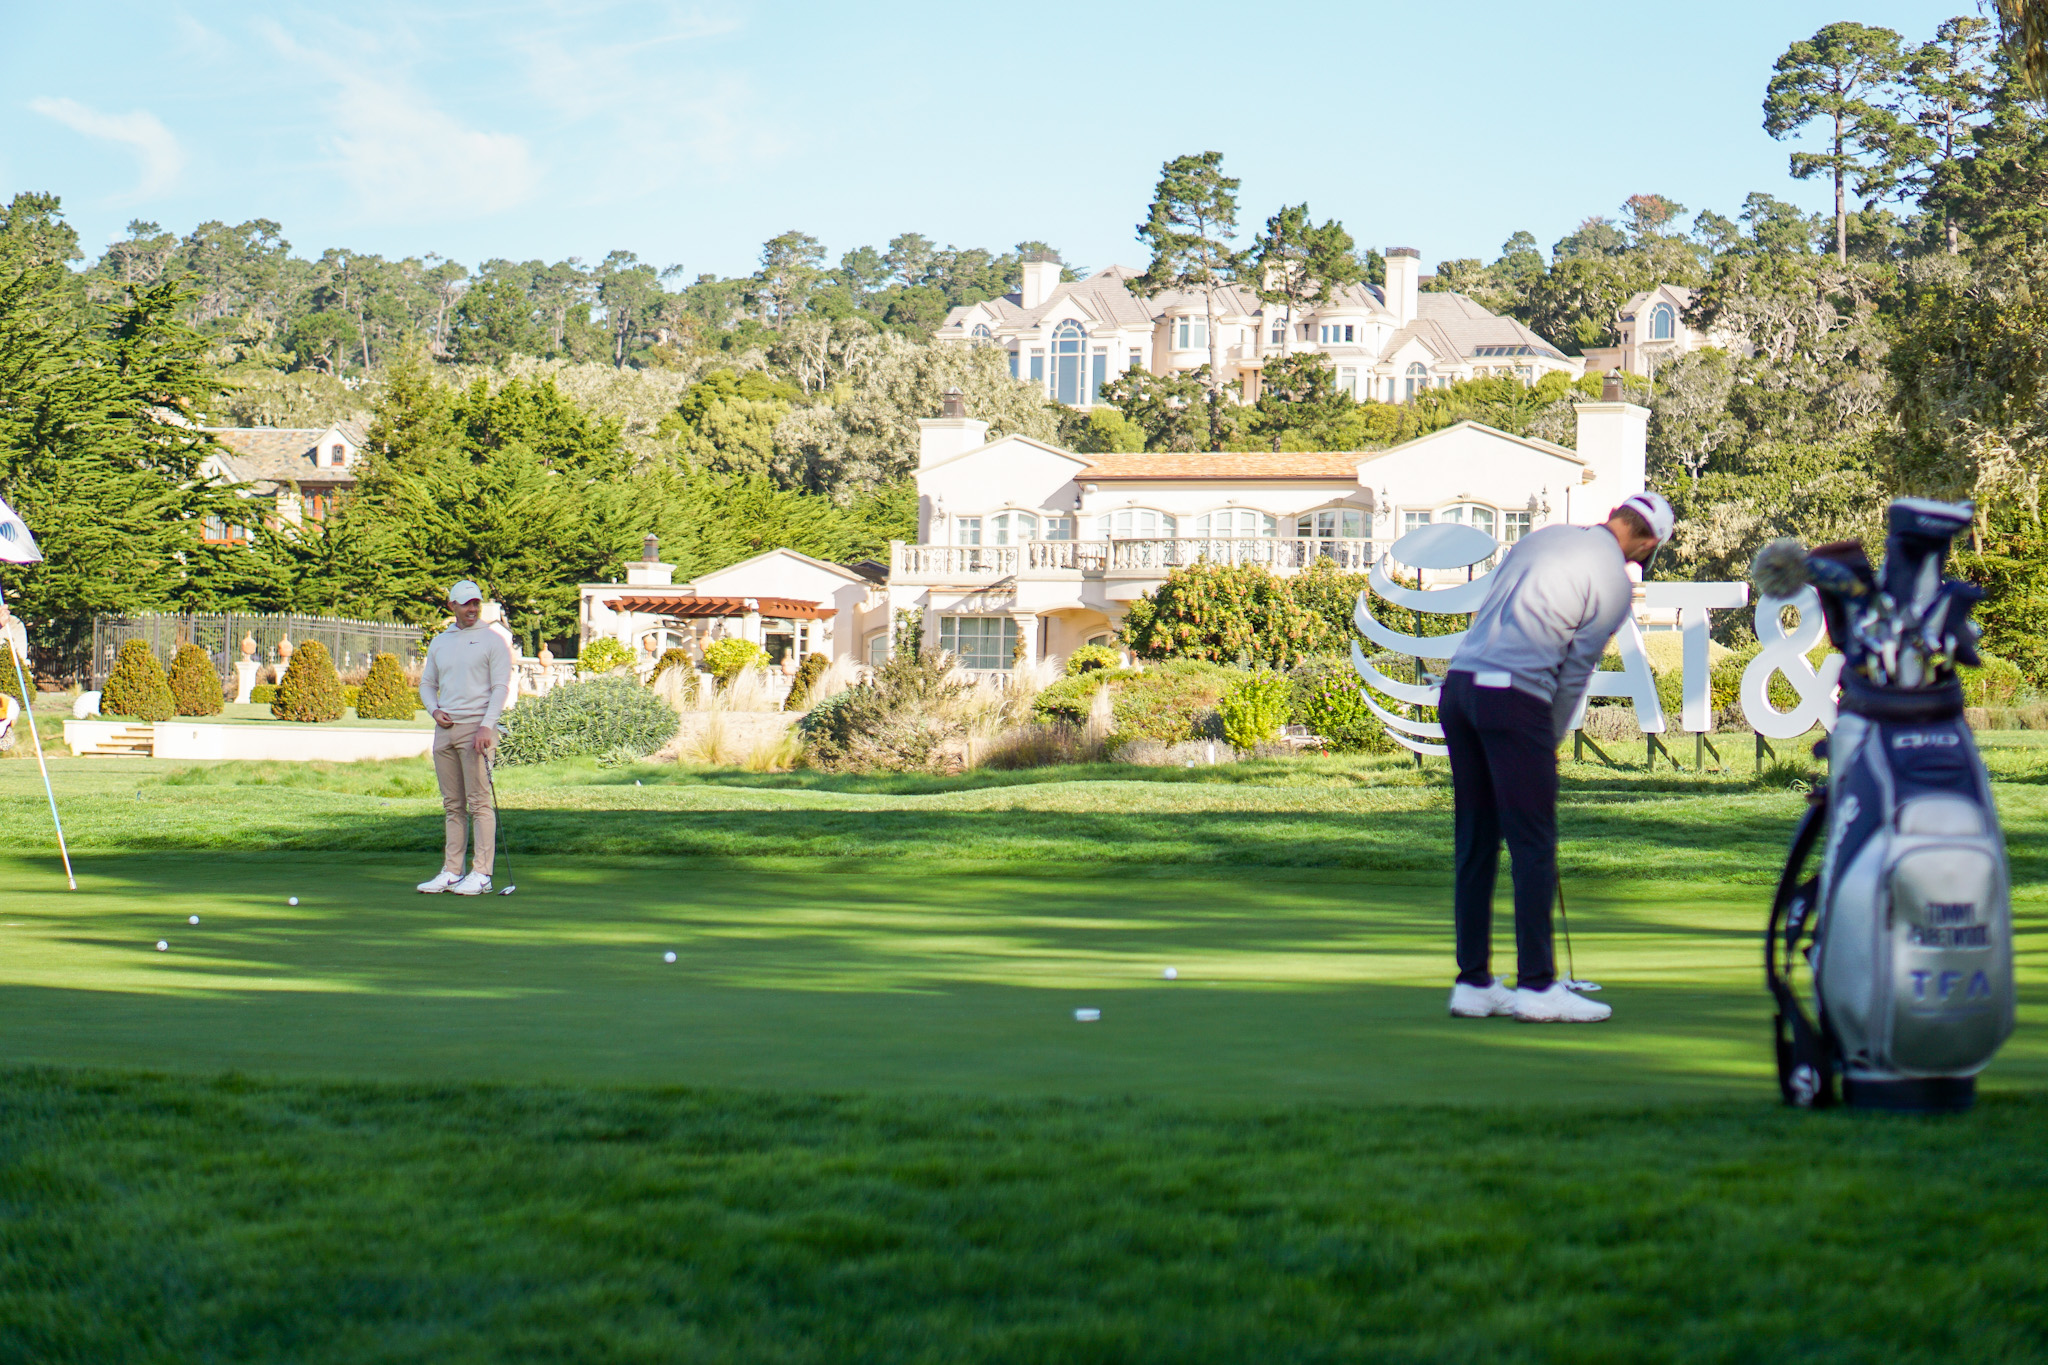 Discussing The Drive To Win with Superstar Athletes Rory McIlroy & Aaron Rodgers at The 2024 AT&T Pebble Beach Pro-Am